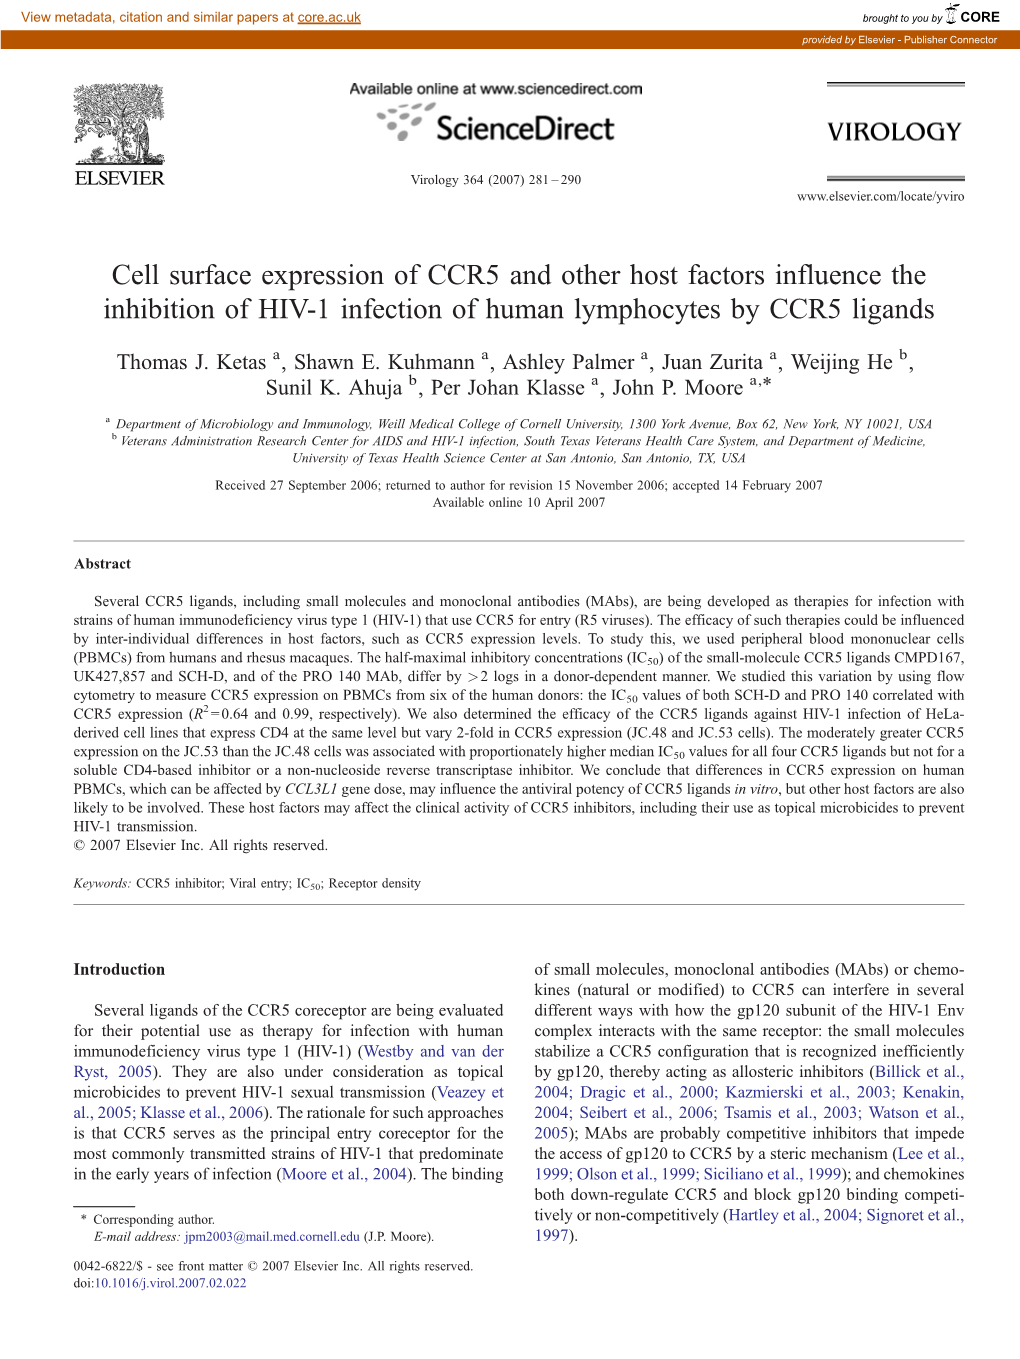 Cell Surface Expression of CCR5 and Other Host Factors Influence the Inhibition of HIV-1 Infection of Human Lymphocytes by CCR5 Ligands